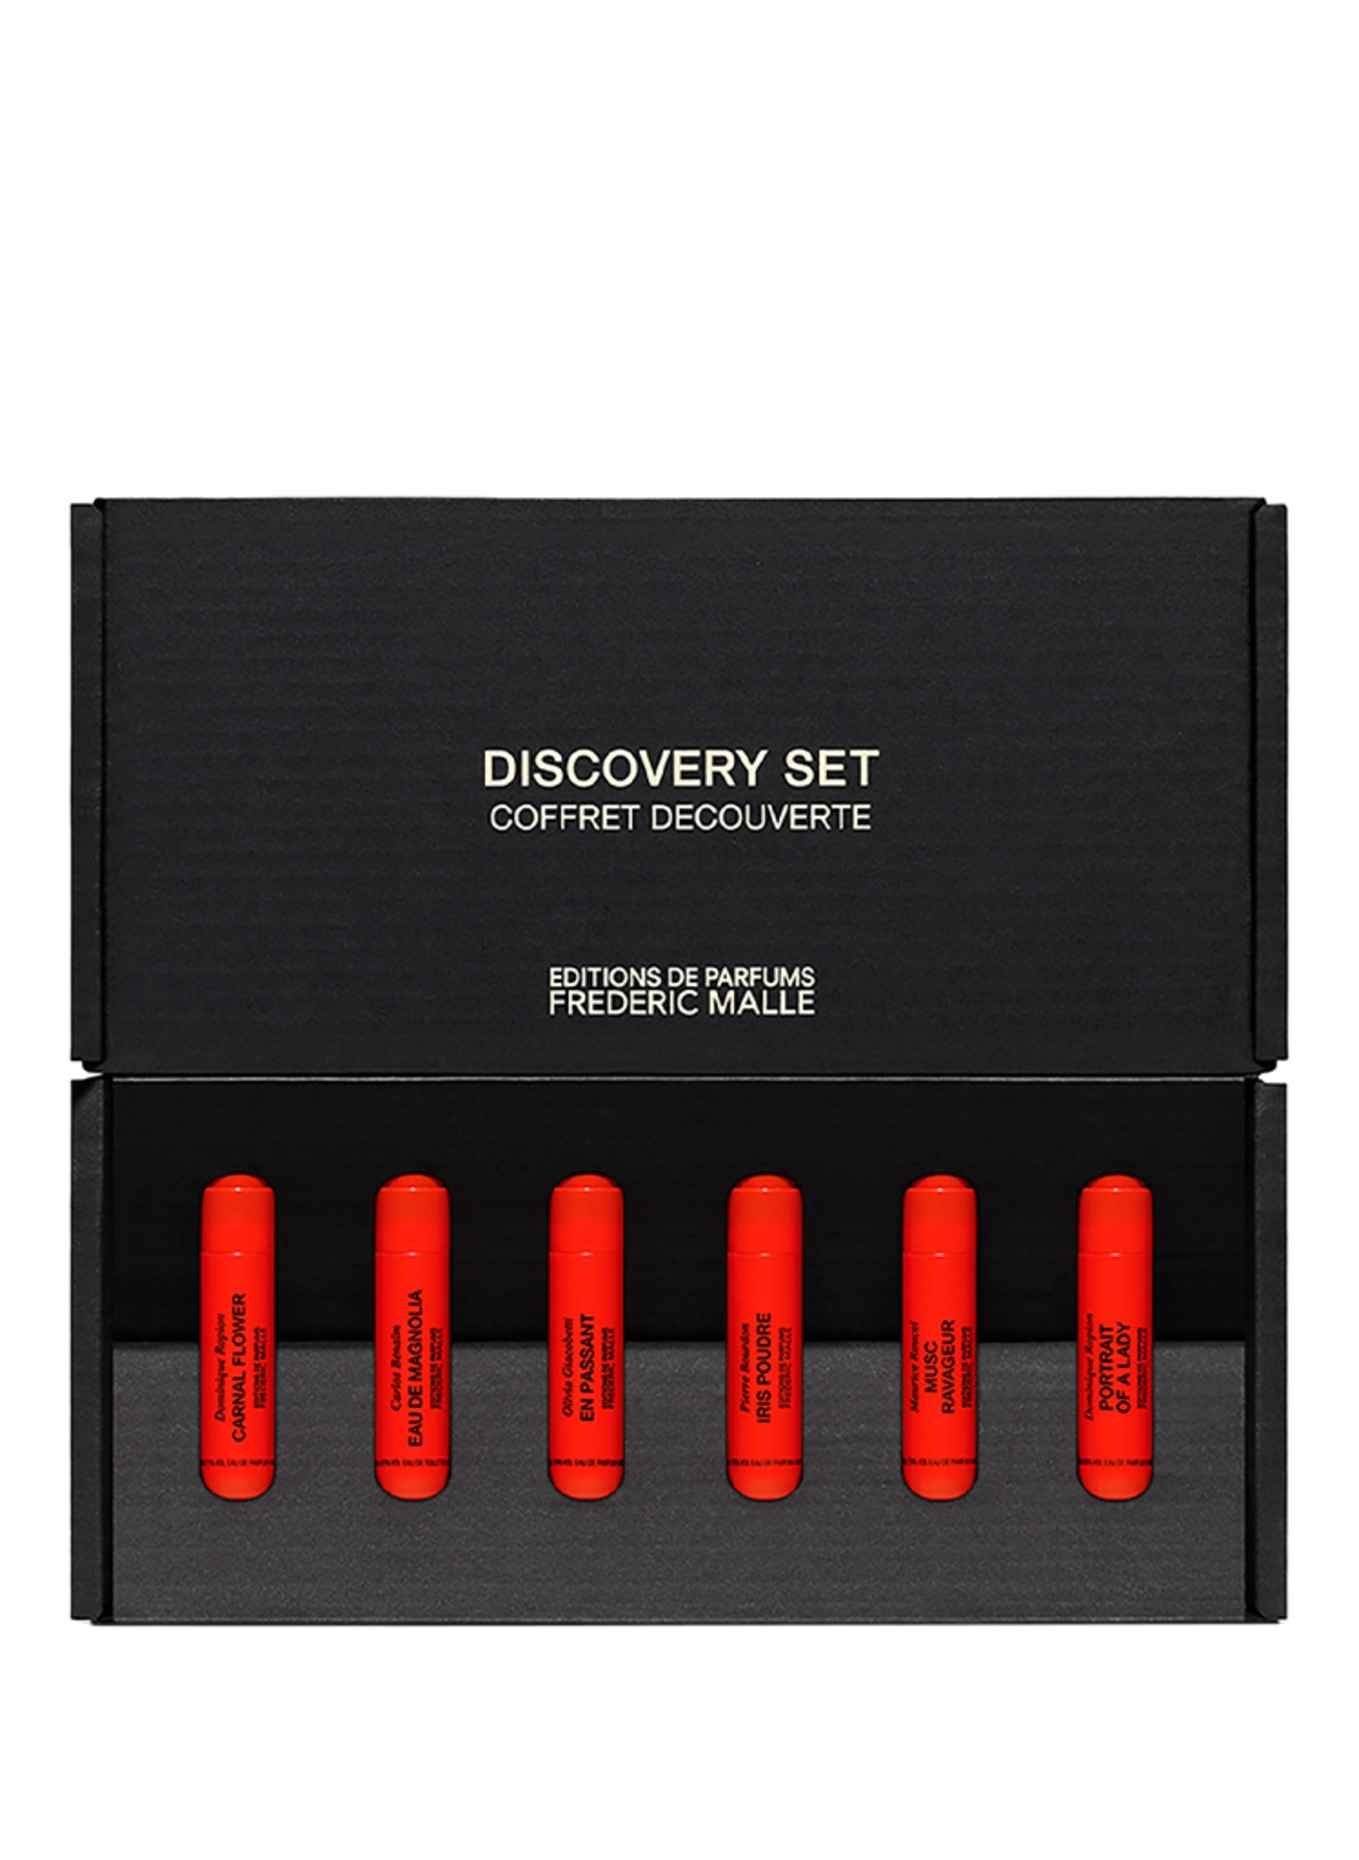 EDITIONS DE PARFUMS FREDERIC MALLE DISCOVERY SET - FOR HER (Bild 1)